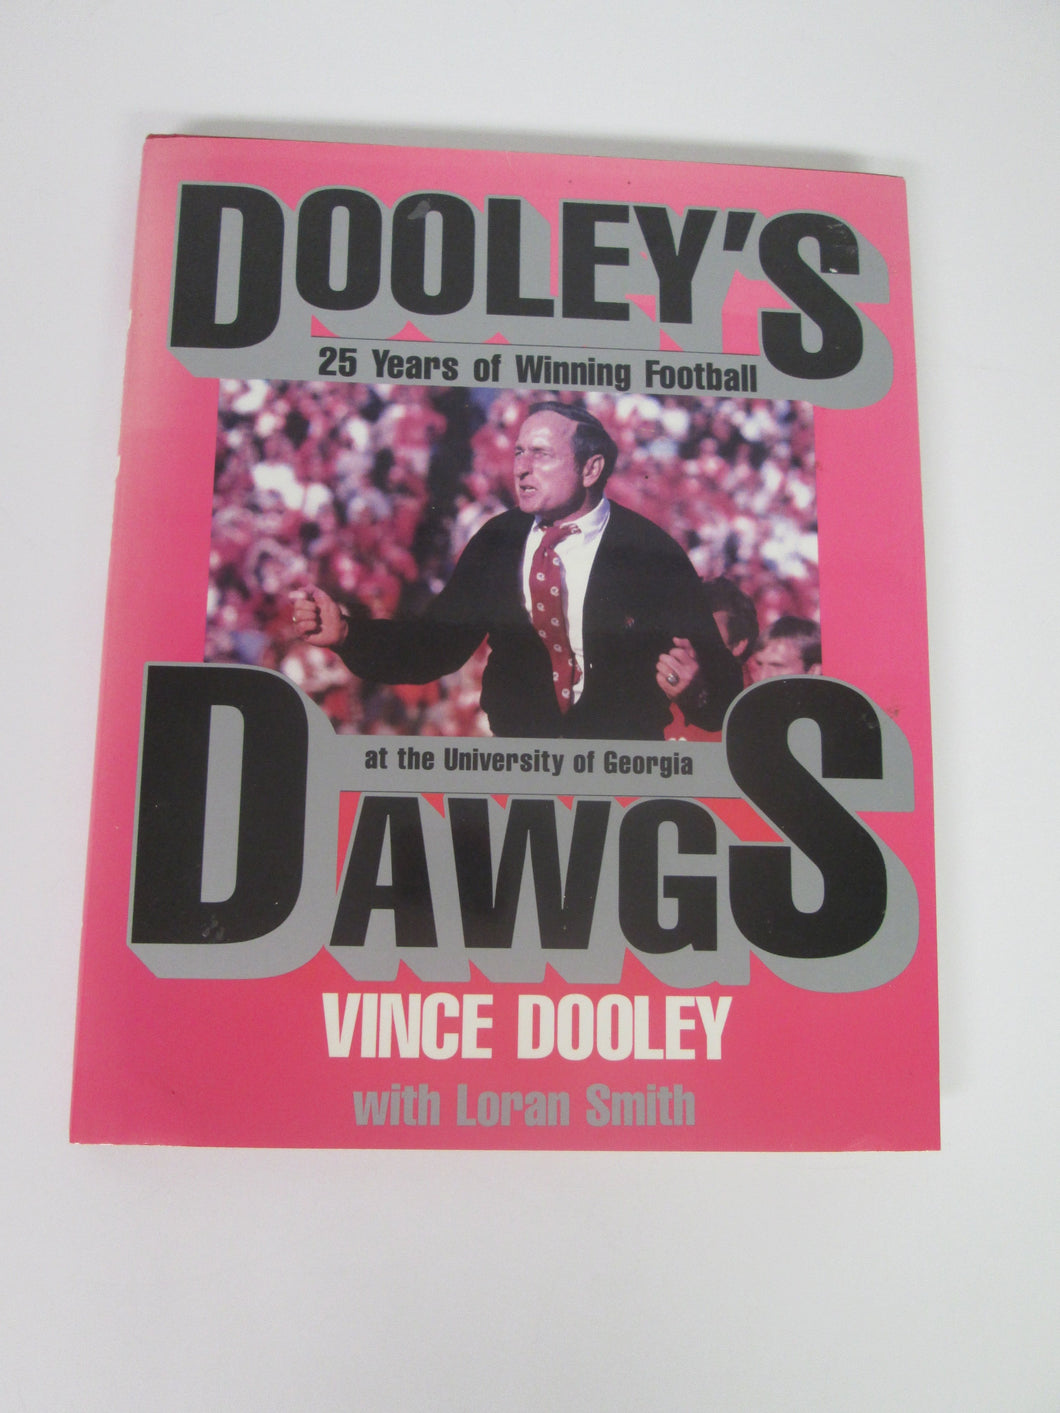 Dooley's Dogs 25 Years of Winning Football at the University of Georgia by Vince Dooley